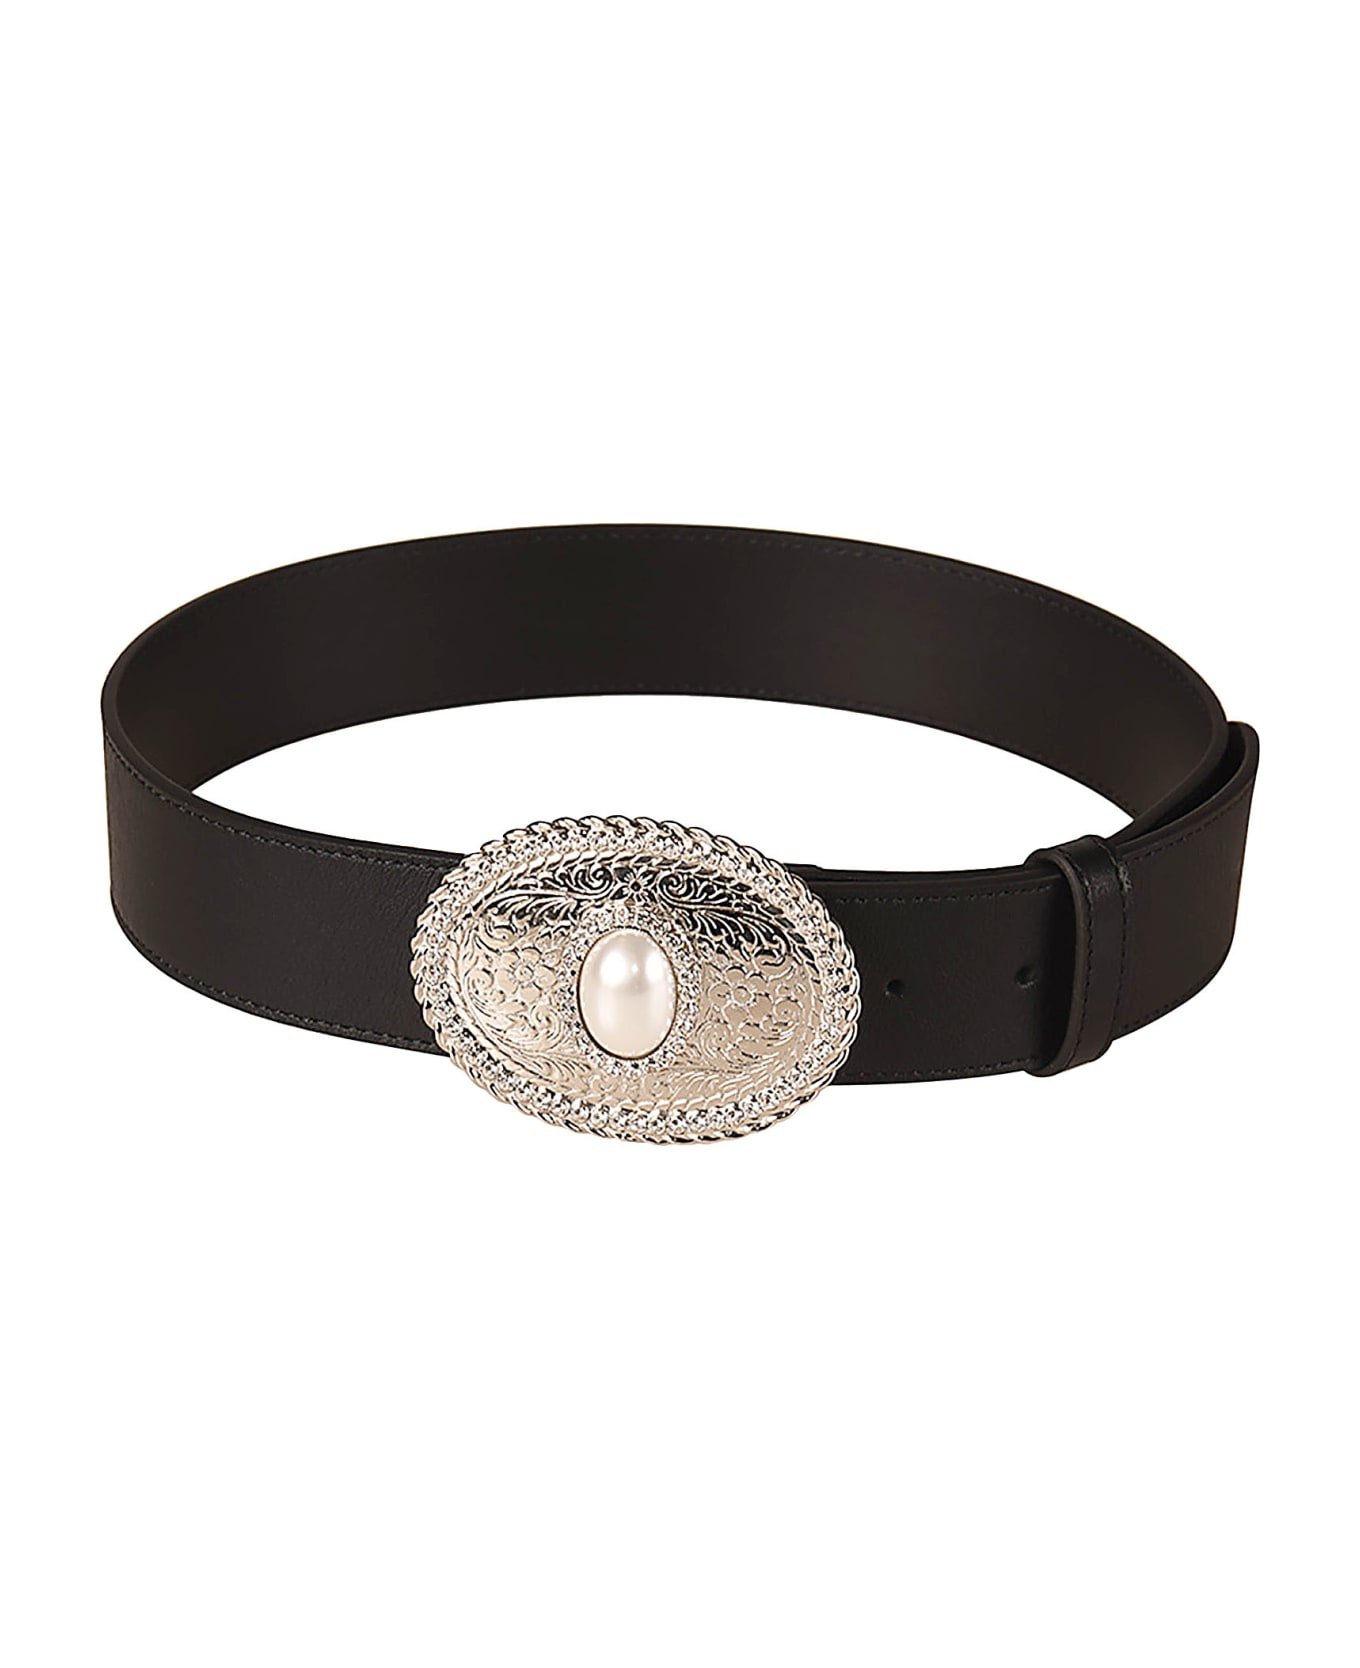 Alessandra Rich Oval Buckle Pearl Detail Leather Belt - Black/Silver